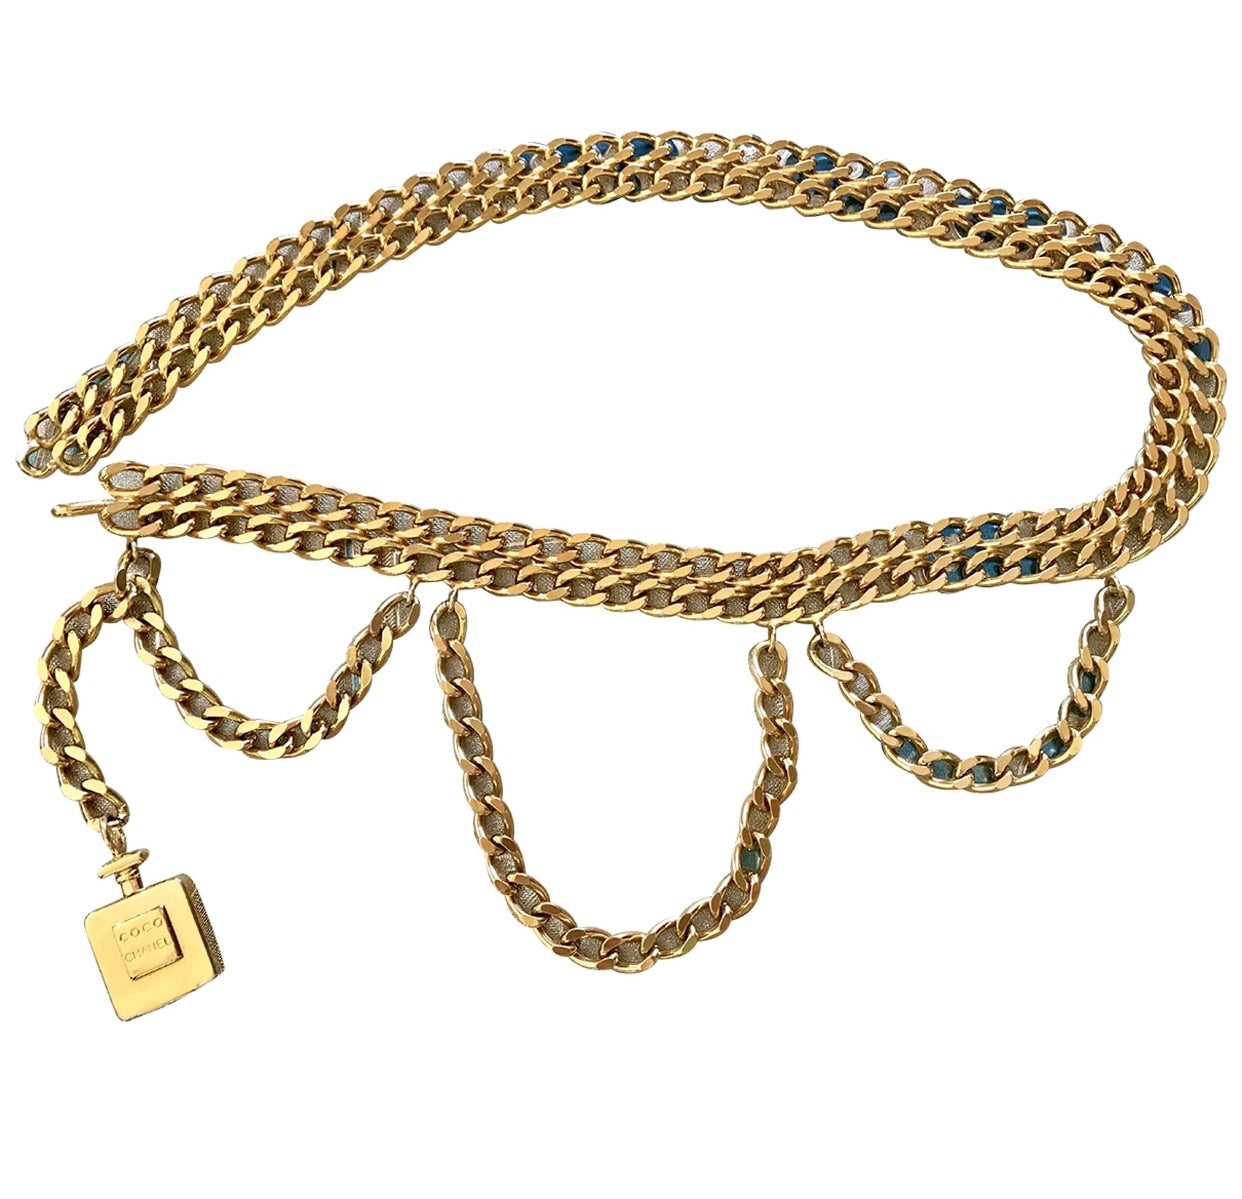 Vintage CHANEL golden double chain belt with logo perfume bottle charm and 3 drop strand design. Rare and Gorgeous belt. Perfect gift.